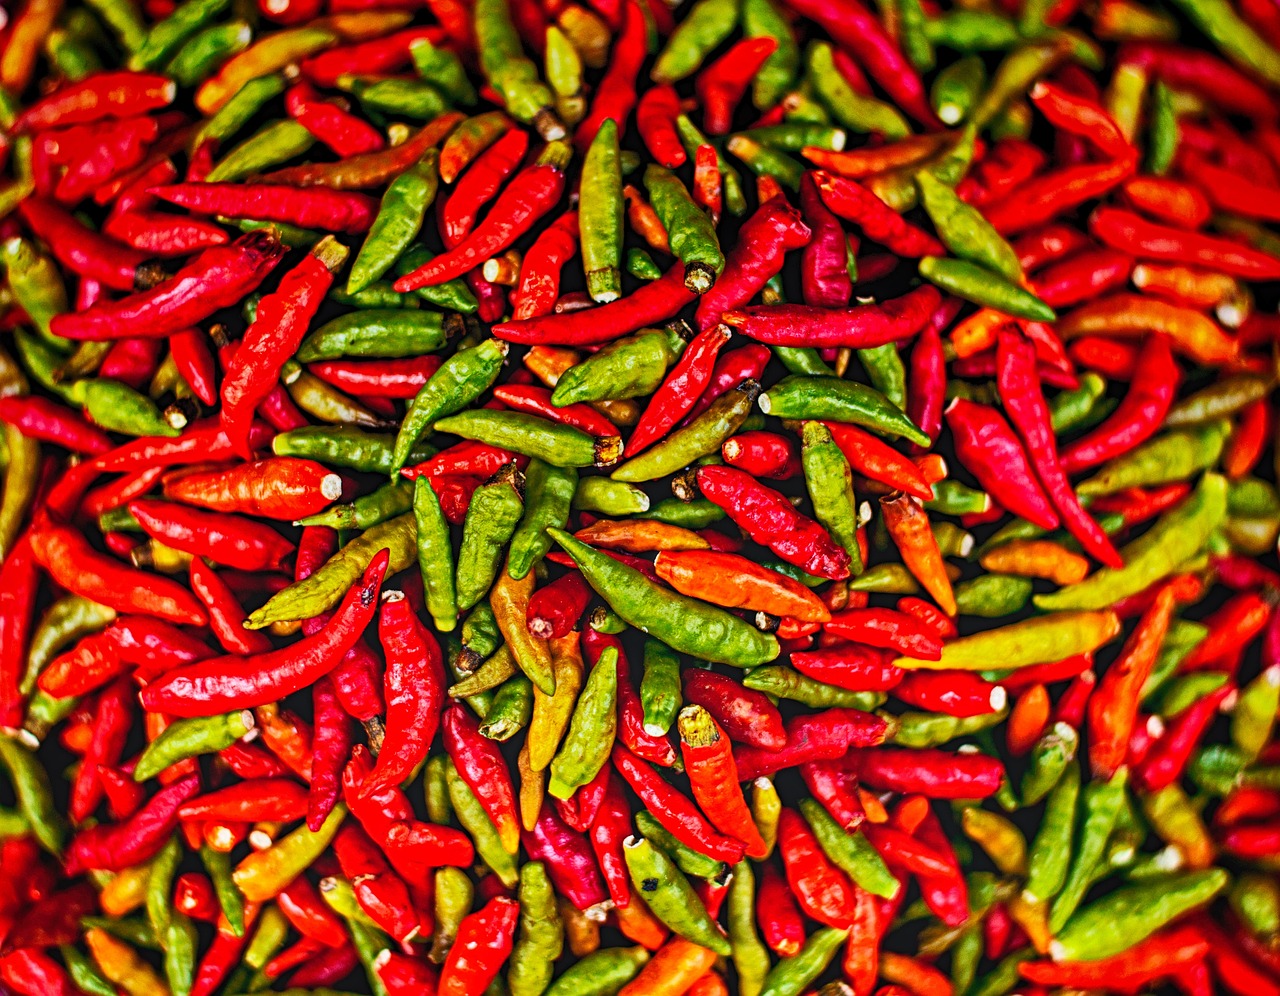 a large pile of red and green peppers, by Jan Rustem, orton effect intricate, shanghai, full of colour 8-w 1024, warmth